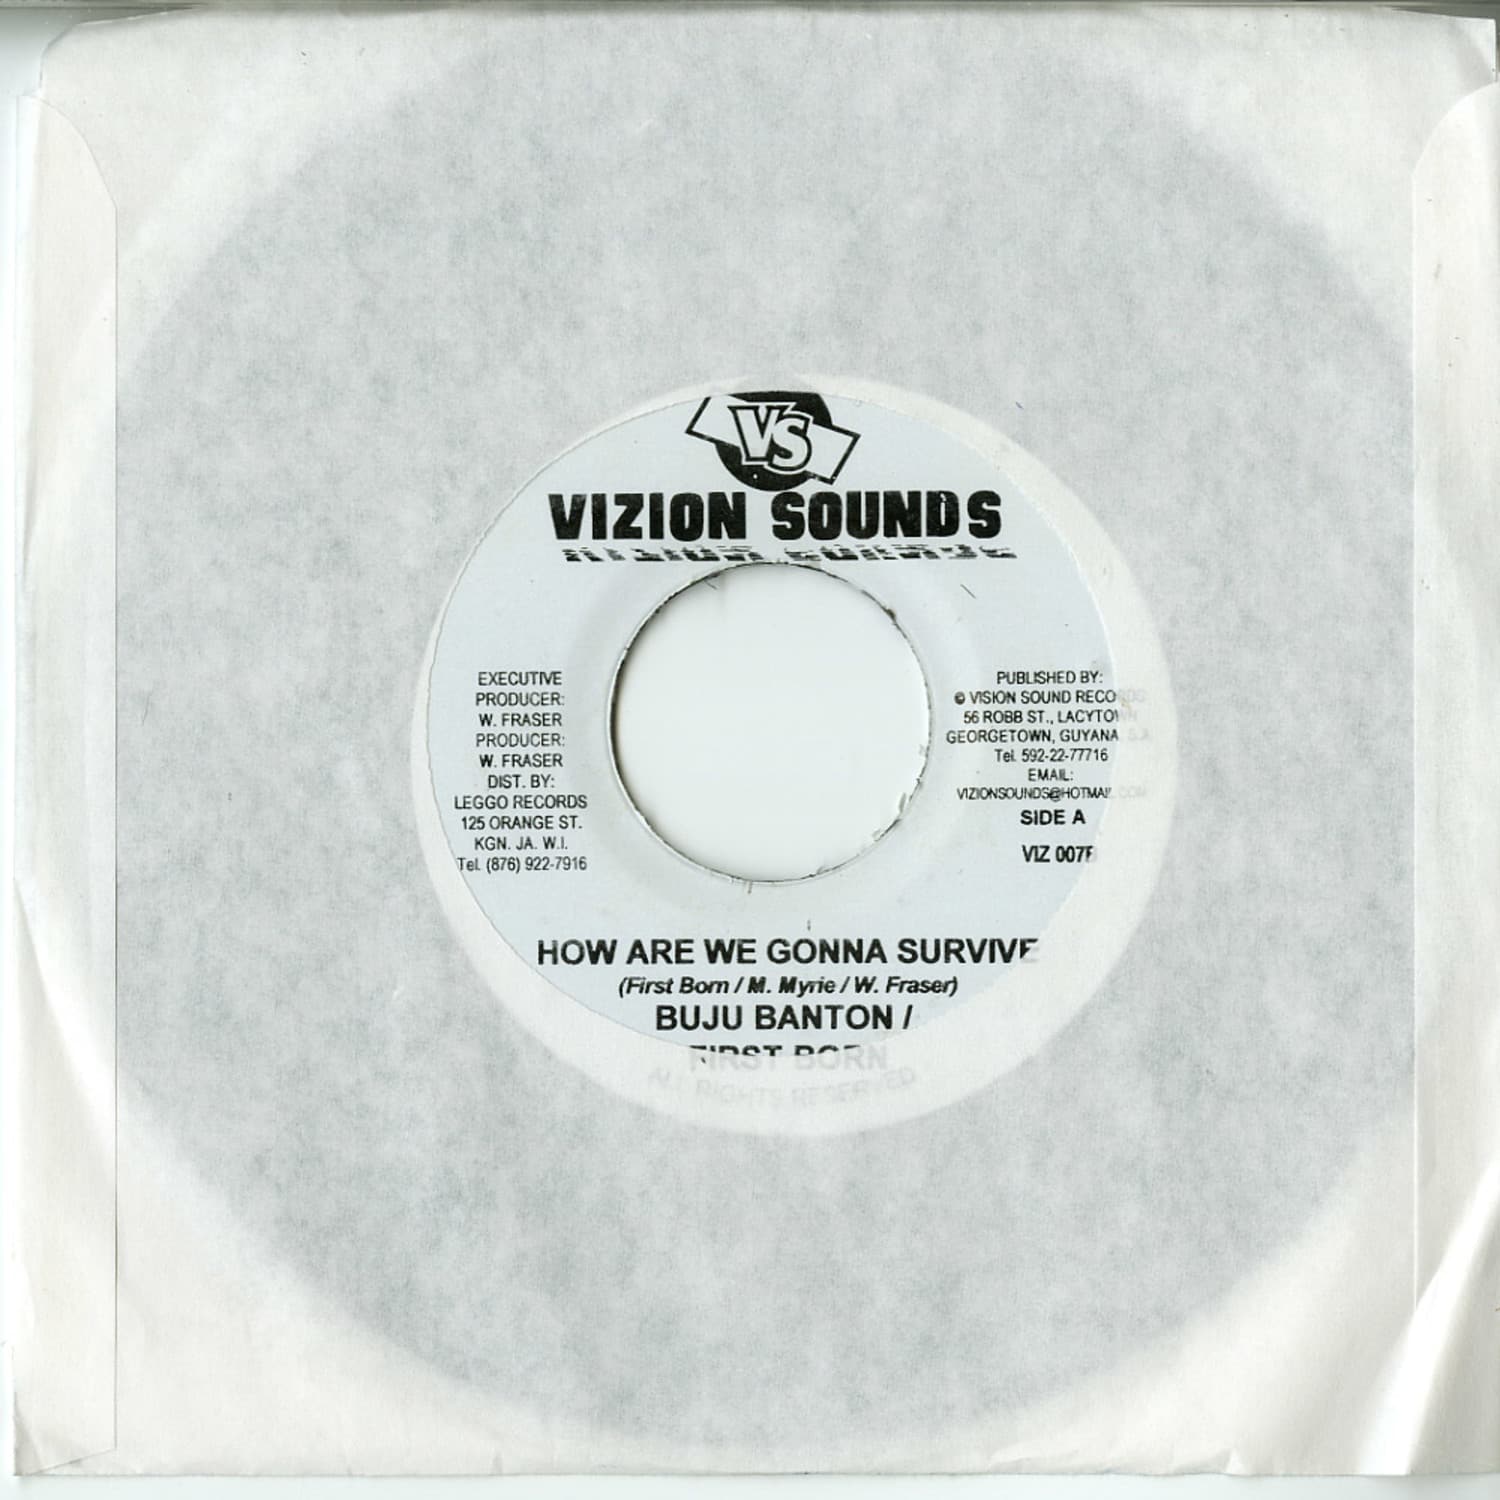 Buju Banton / First Born / W. Fraser - HOW ARE WE GONNA SURVIVE 